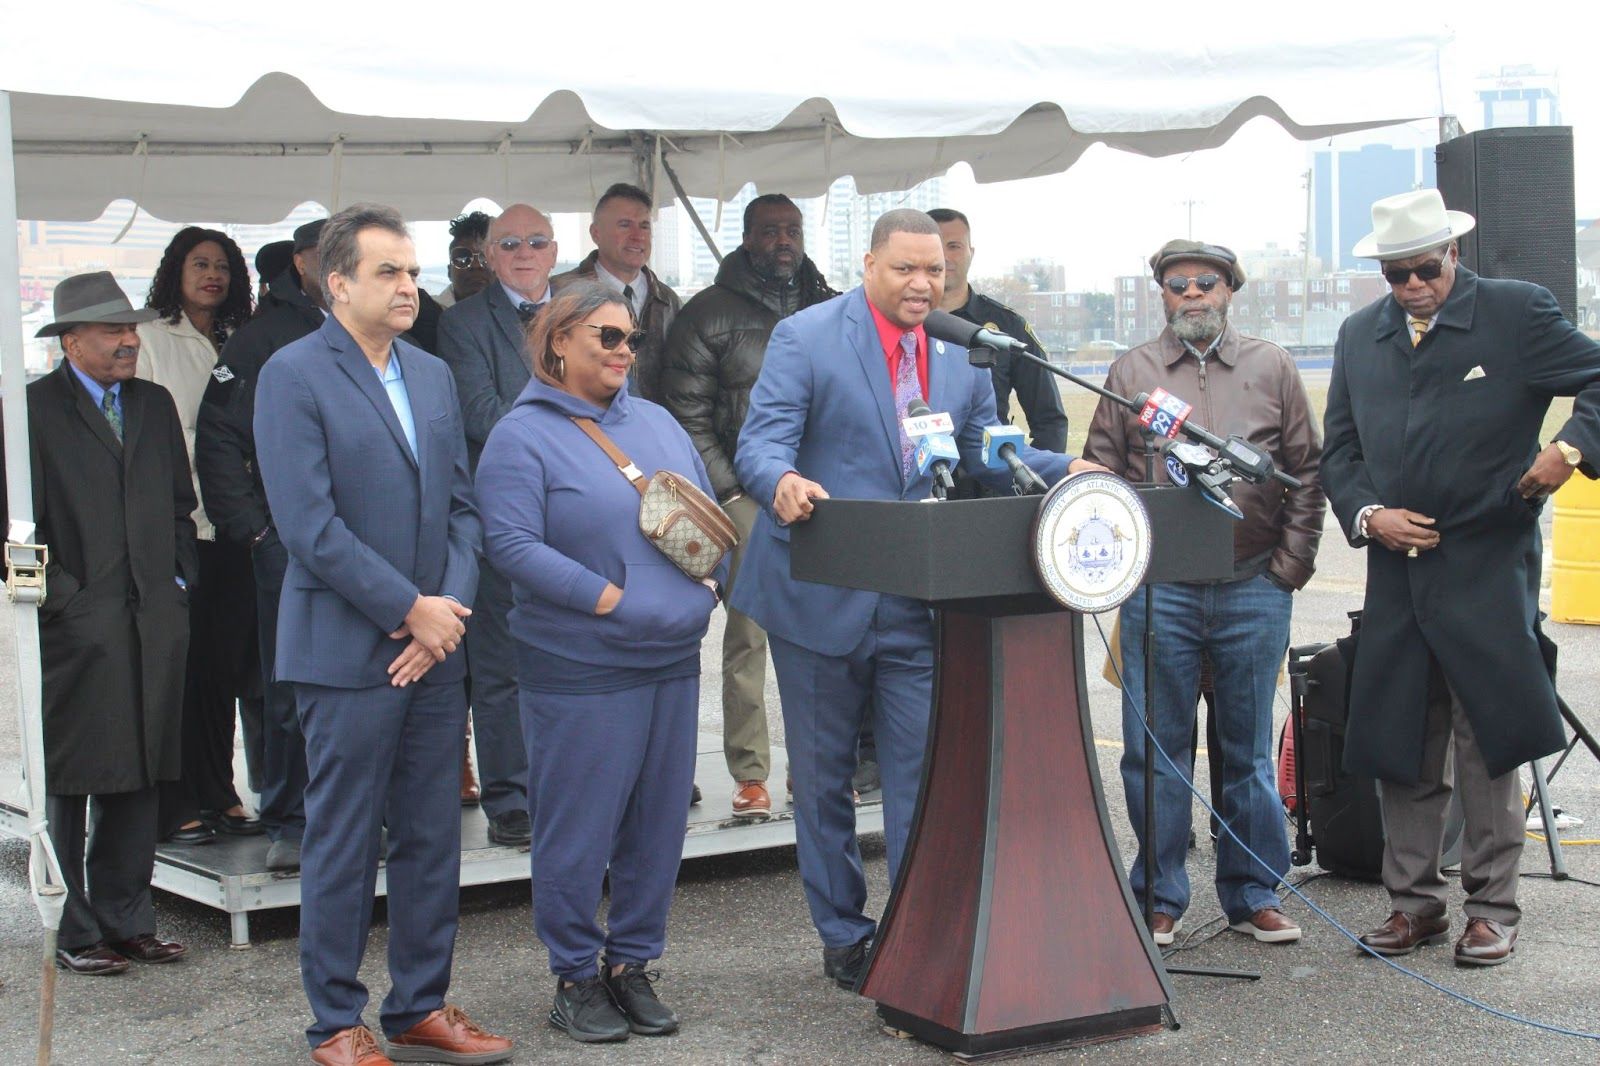 Mayor Marty Small Sr. and others gather for a news conference to discuss Bader Field redevelopment. Image Source: City of Atlantic City